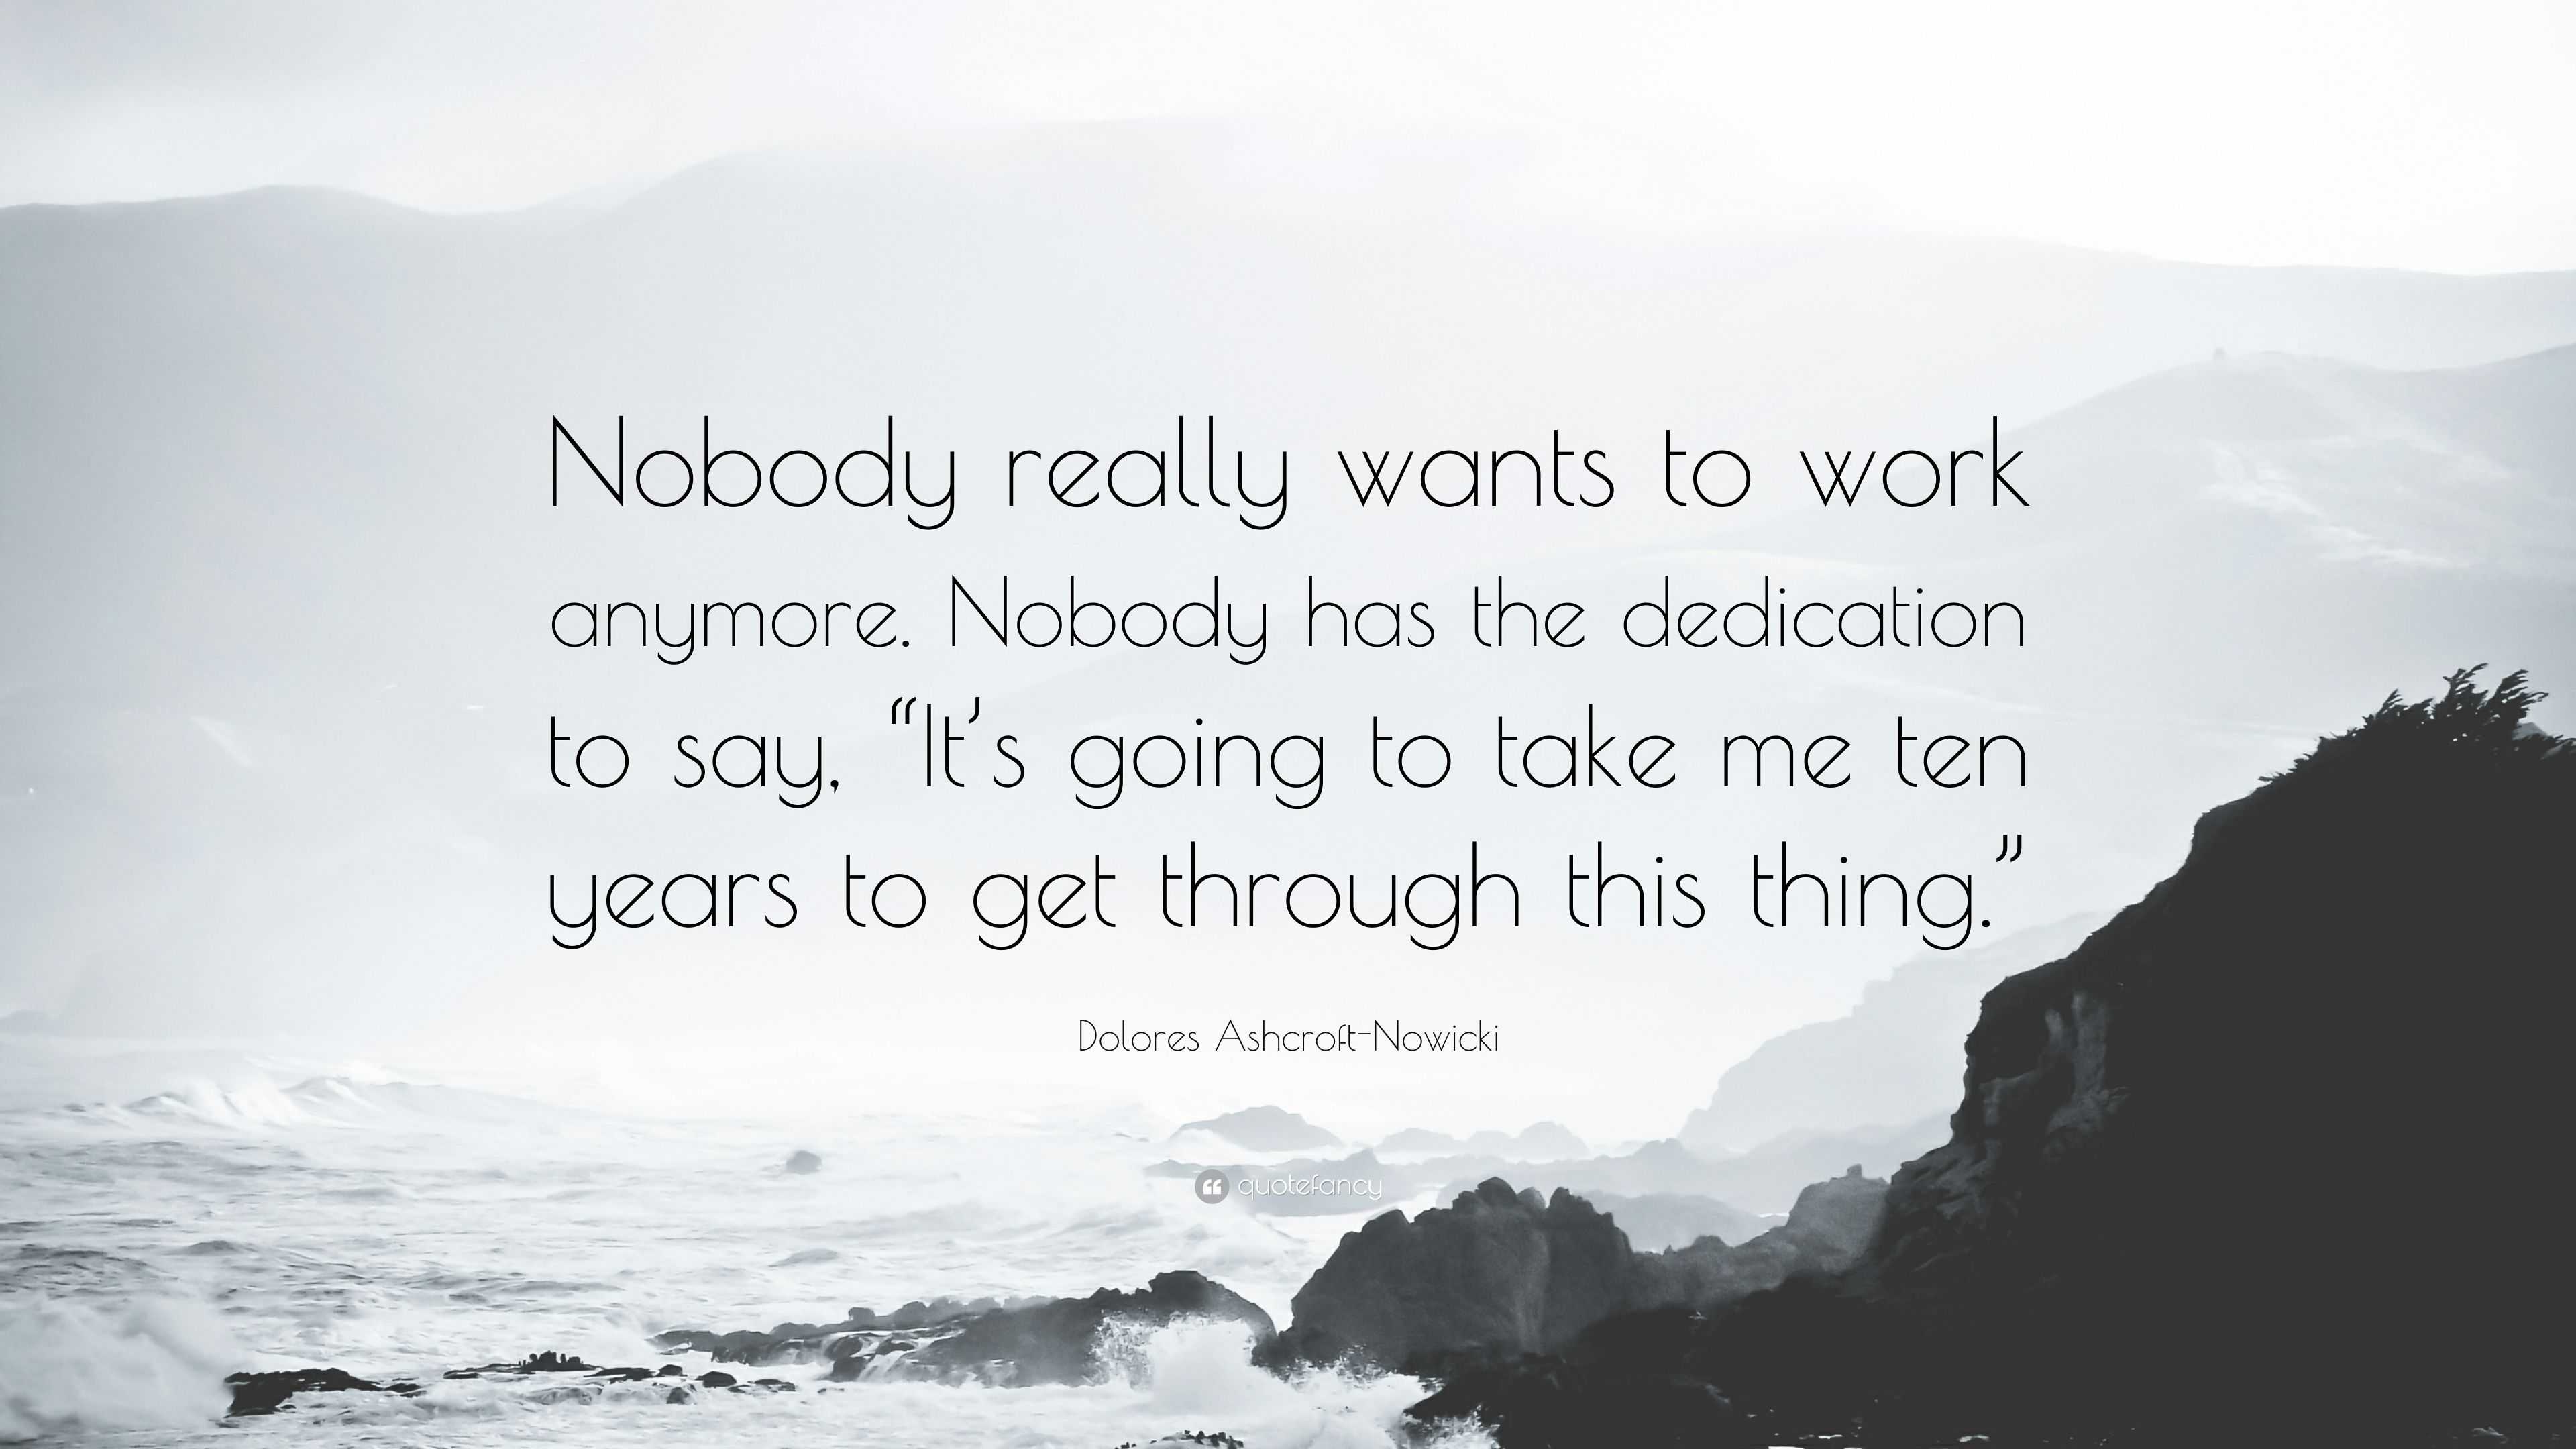 Dolores Ashcroft-Nowicki Quote: “Nobody really wants to work